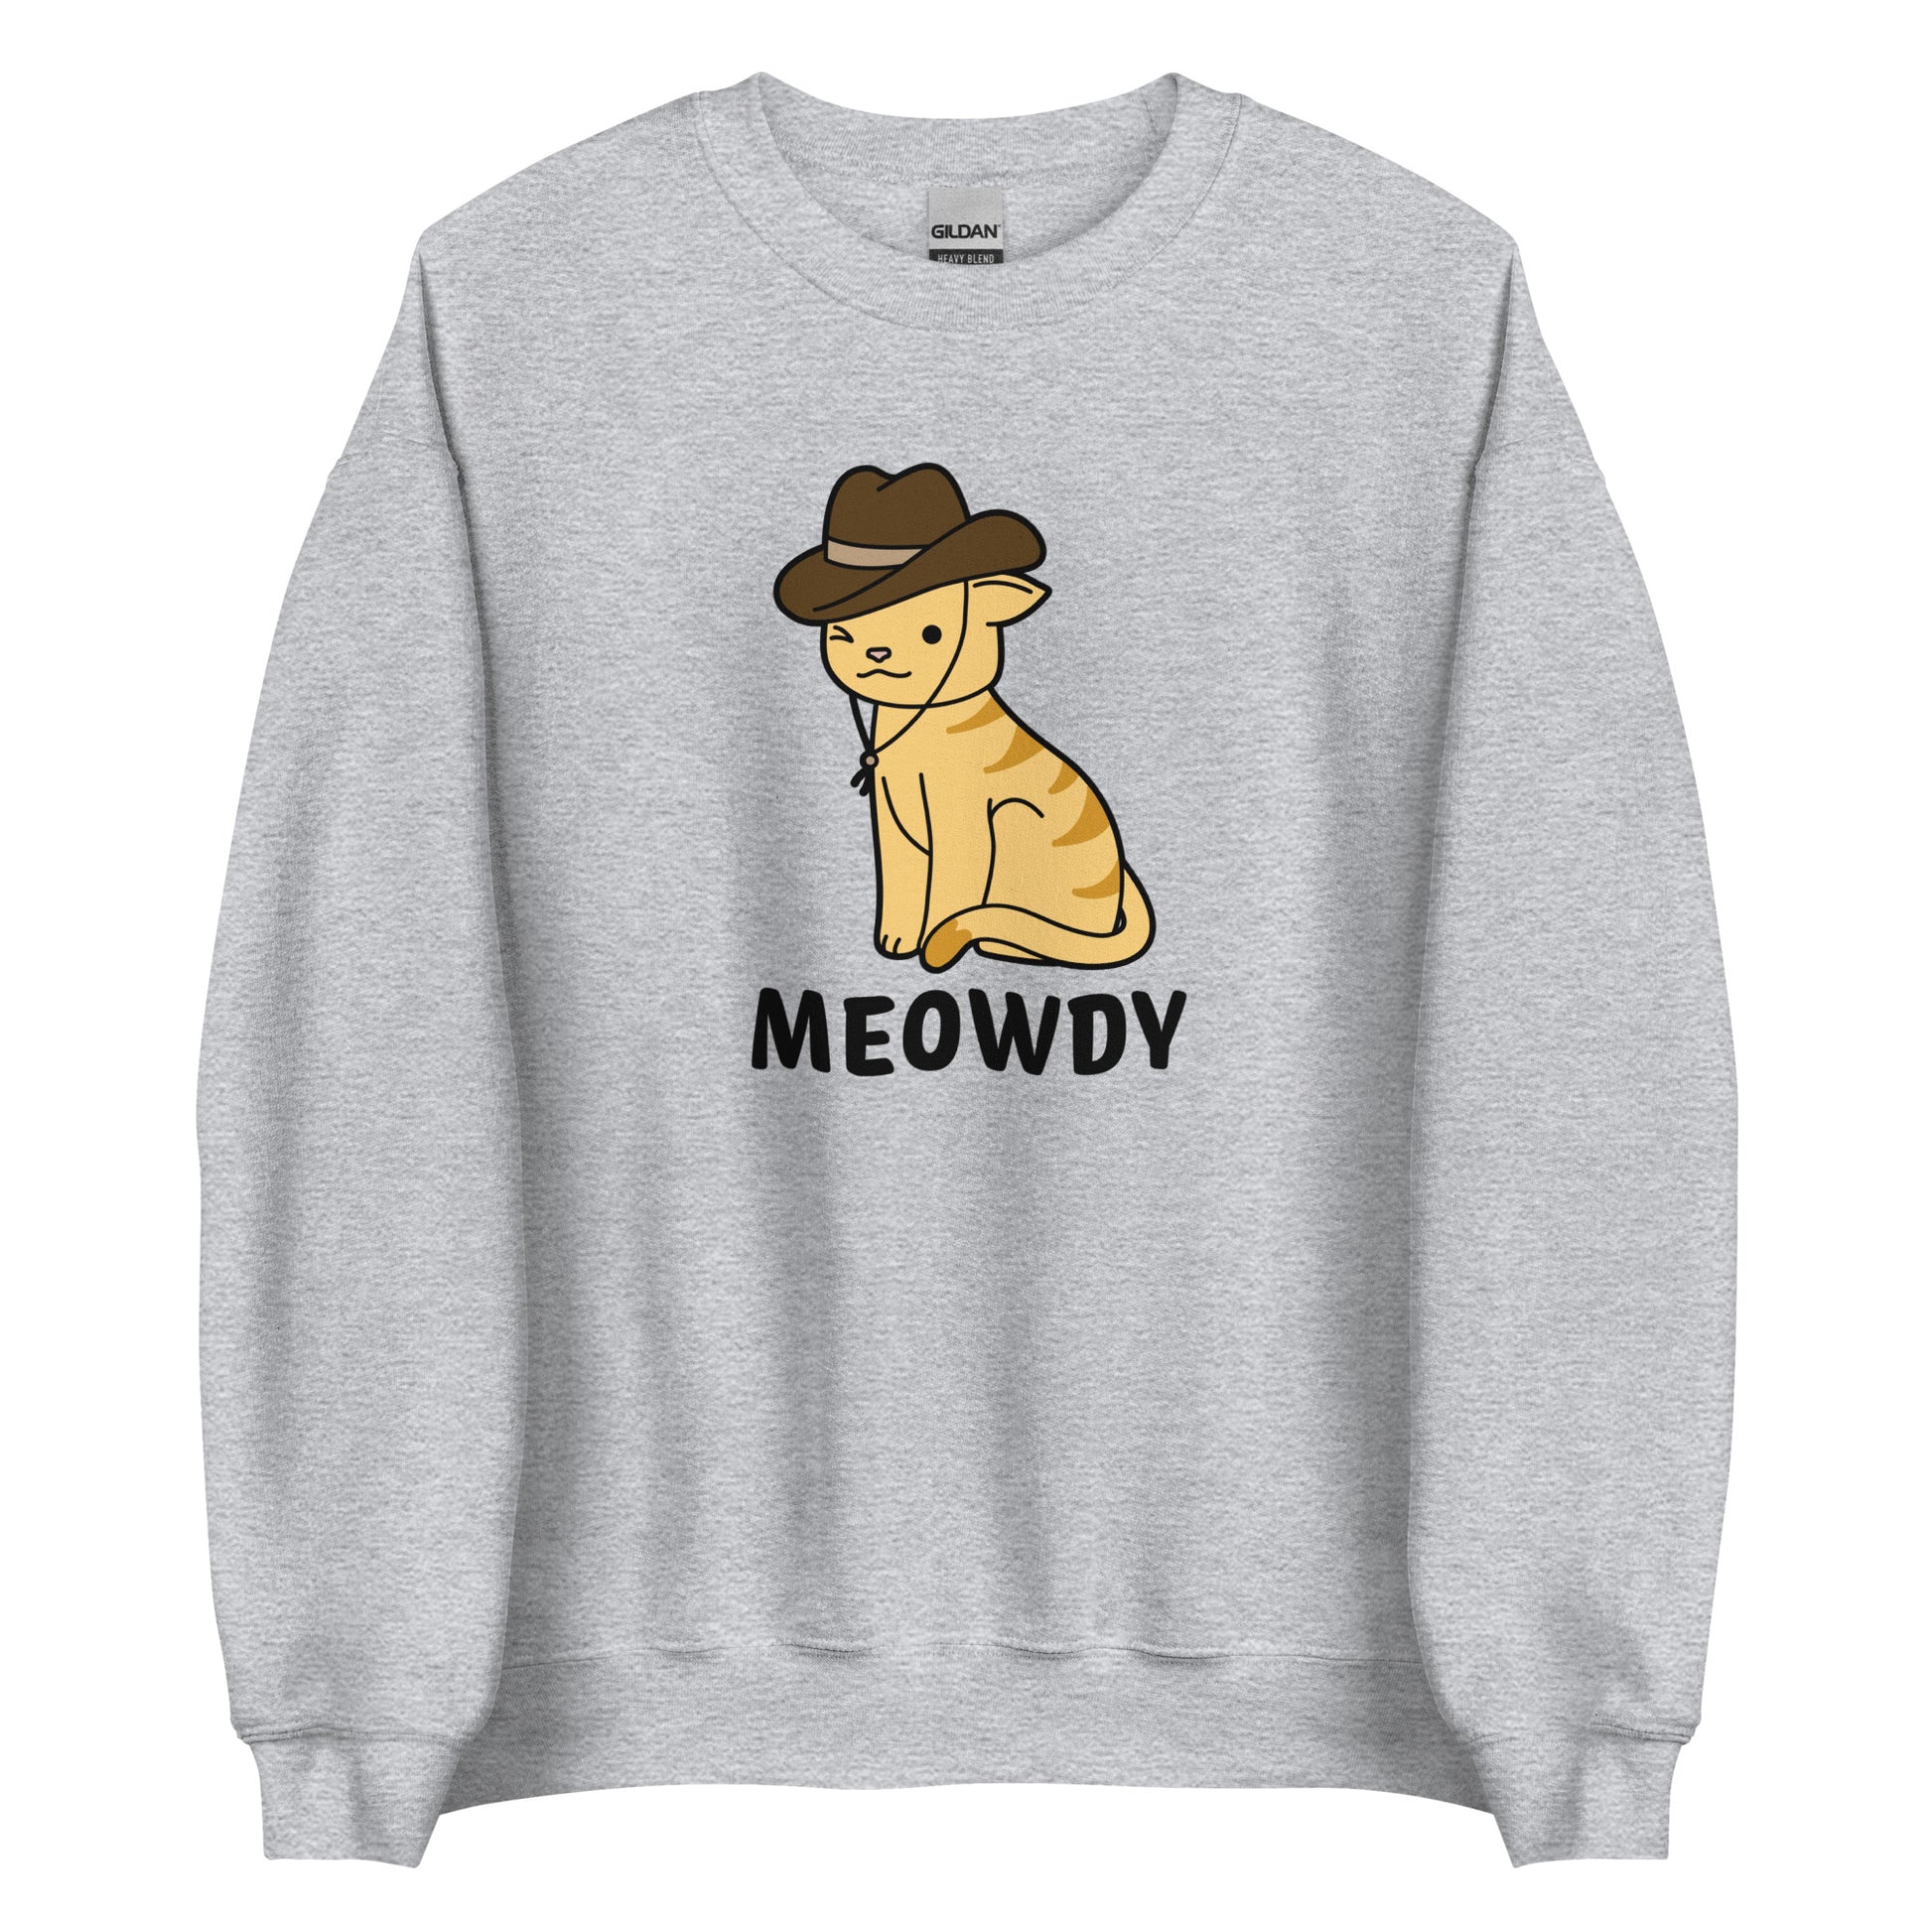 A grey crewneck sweatshirt featuring an illsutration of an orange striped cat. The cat is wearing a cowboy hat and winking. Text beneath him reads "Meowdy".